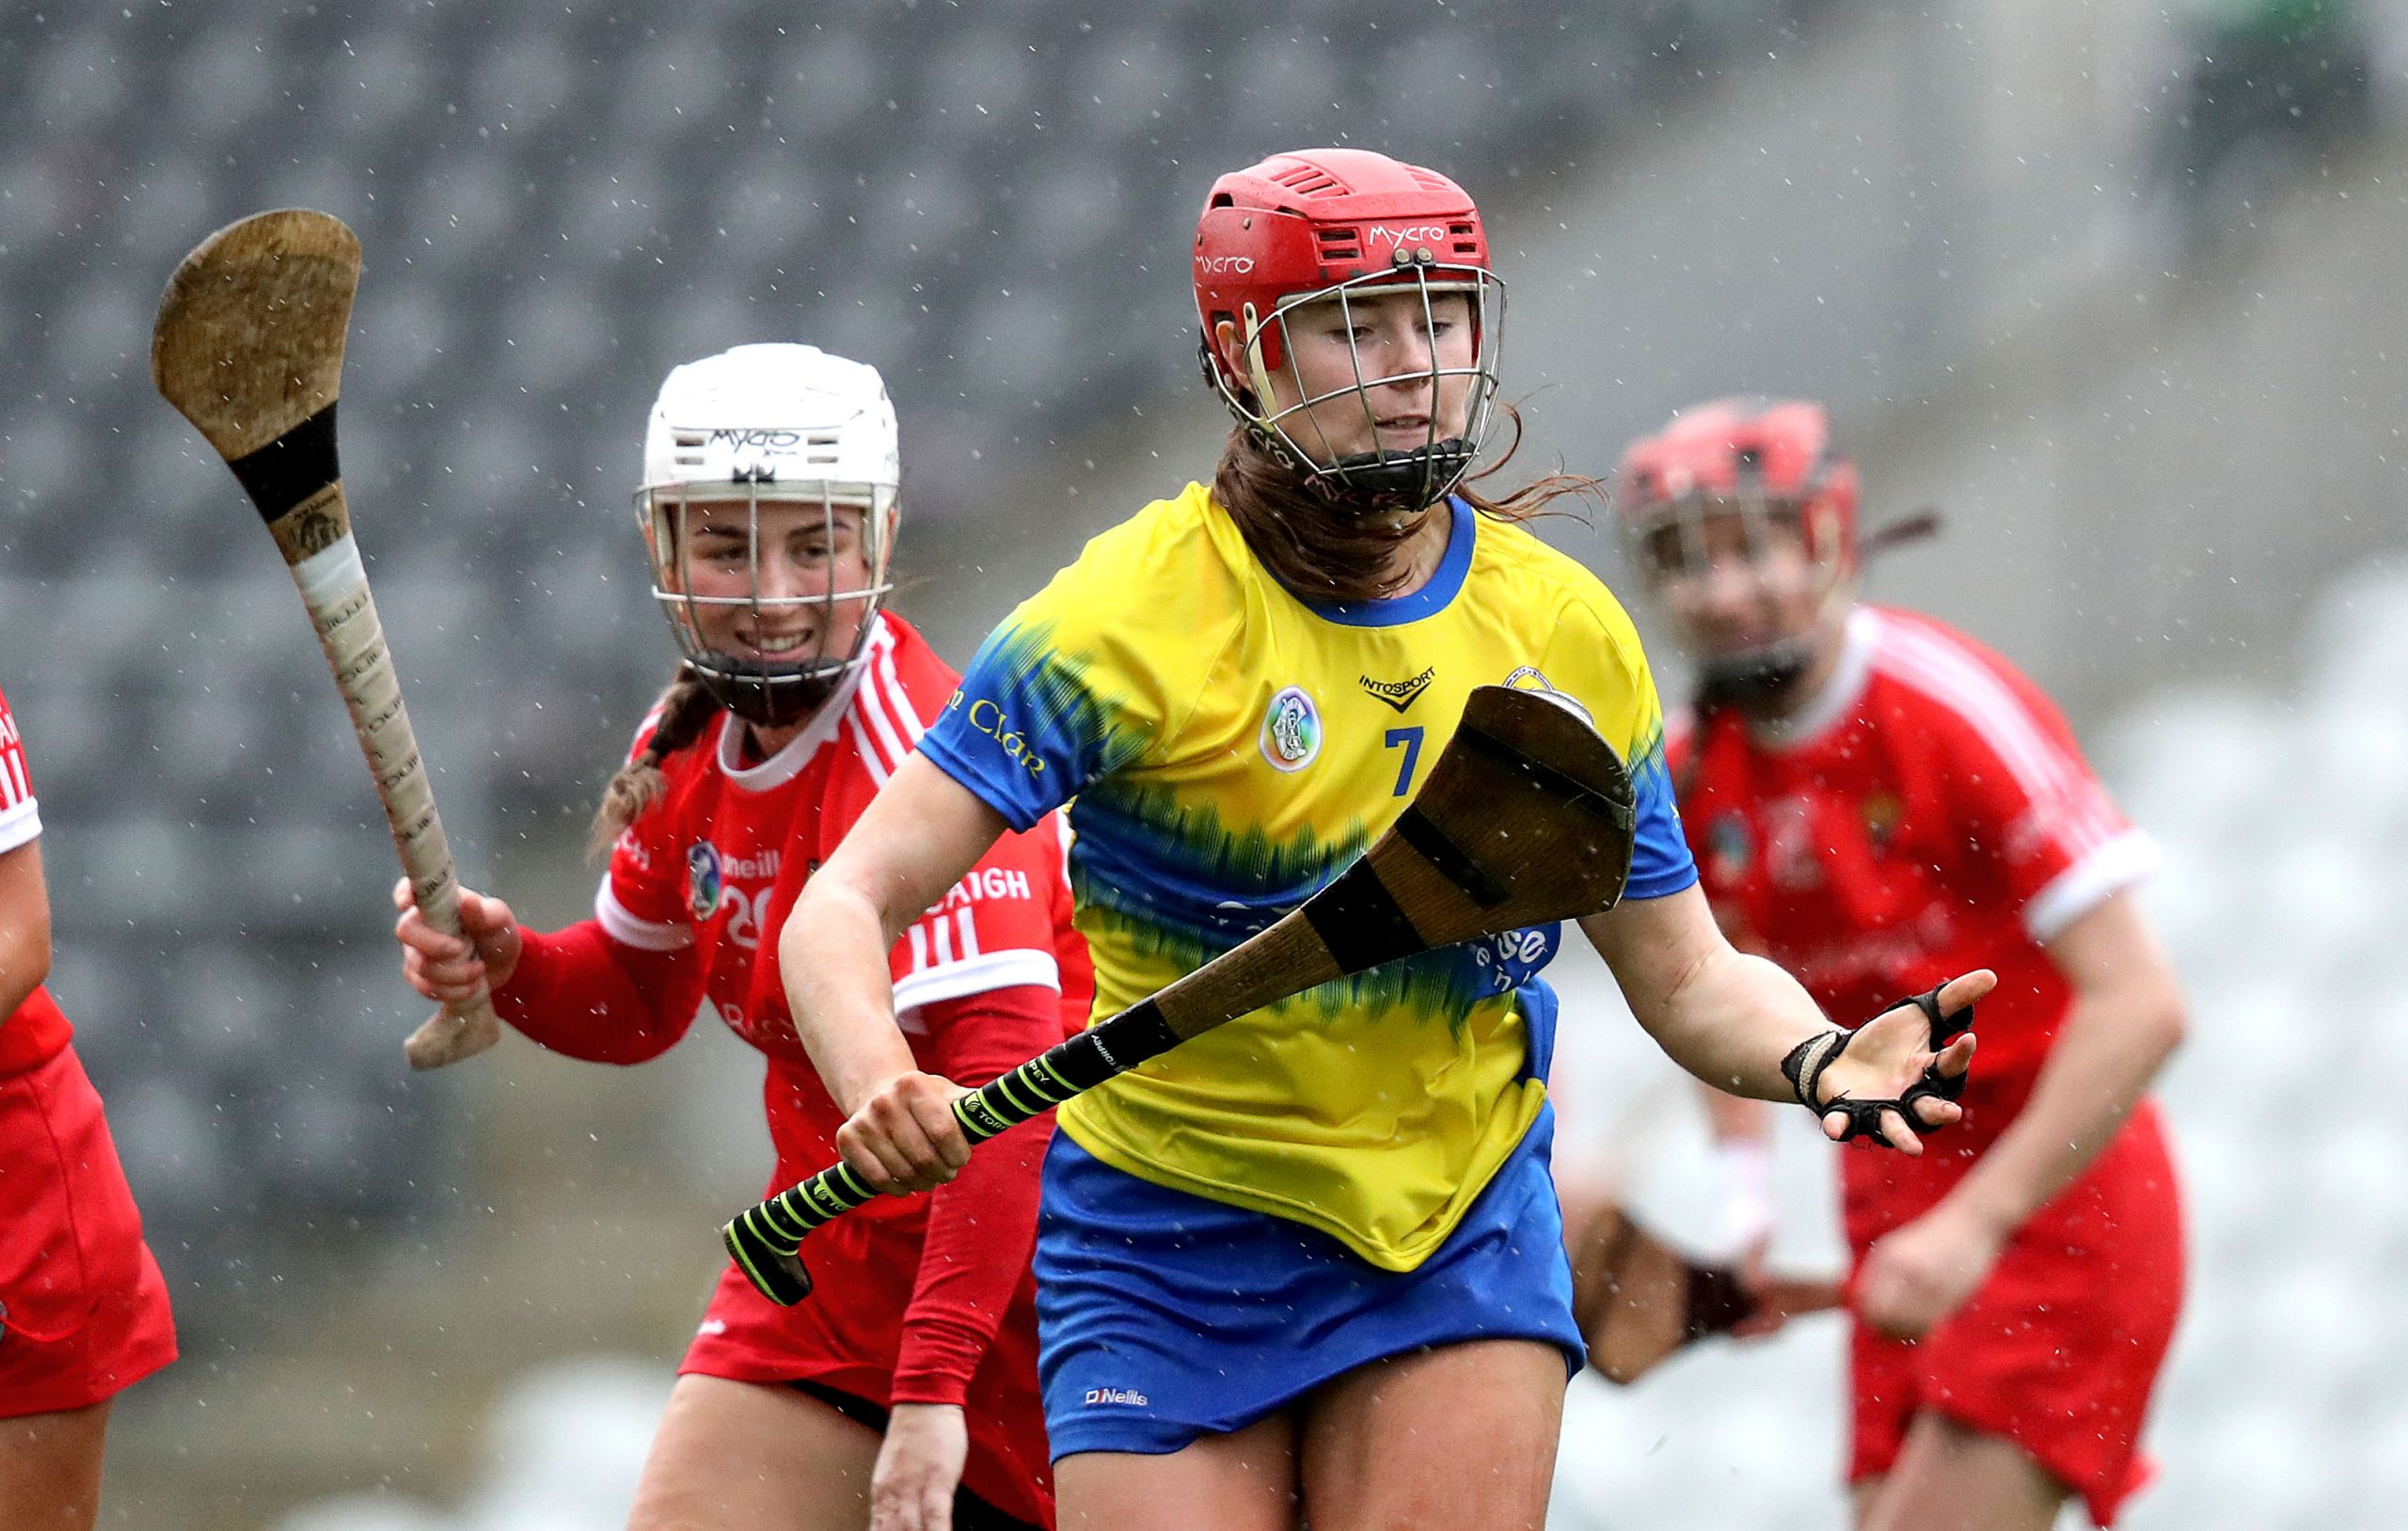 “I have such pride in playing for Clare” – Alannah Ryan